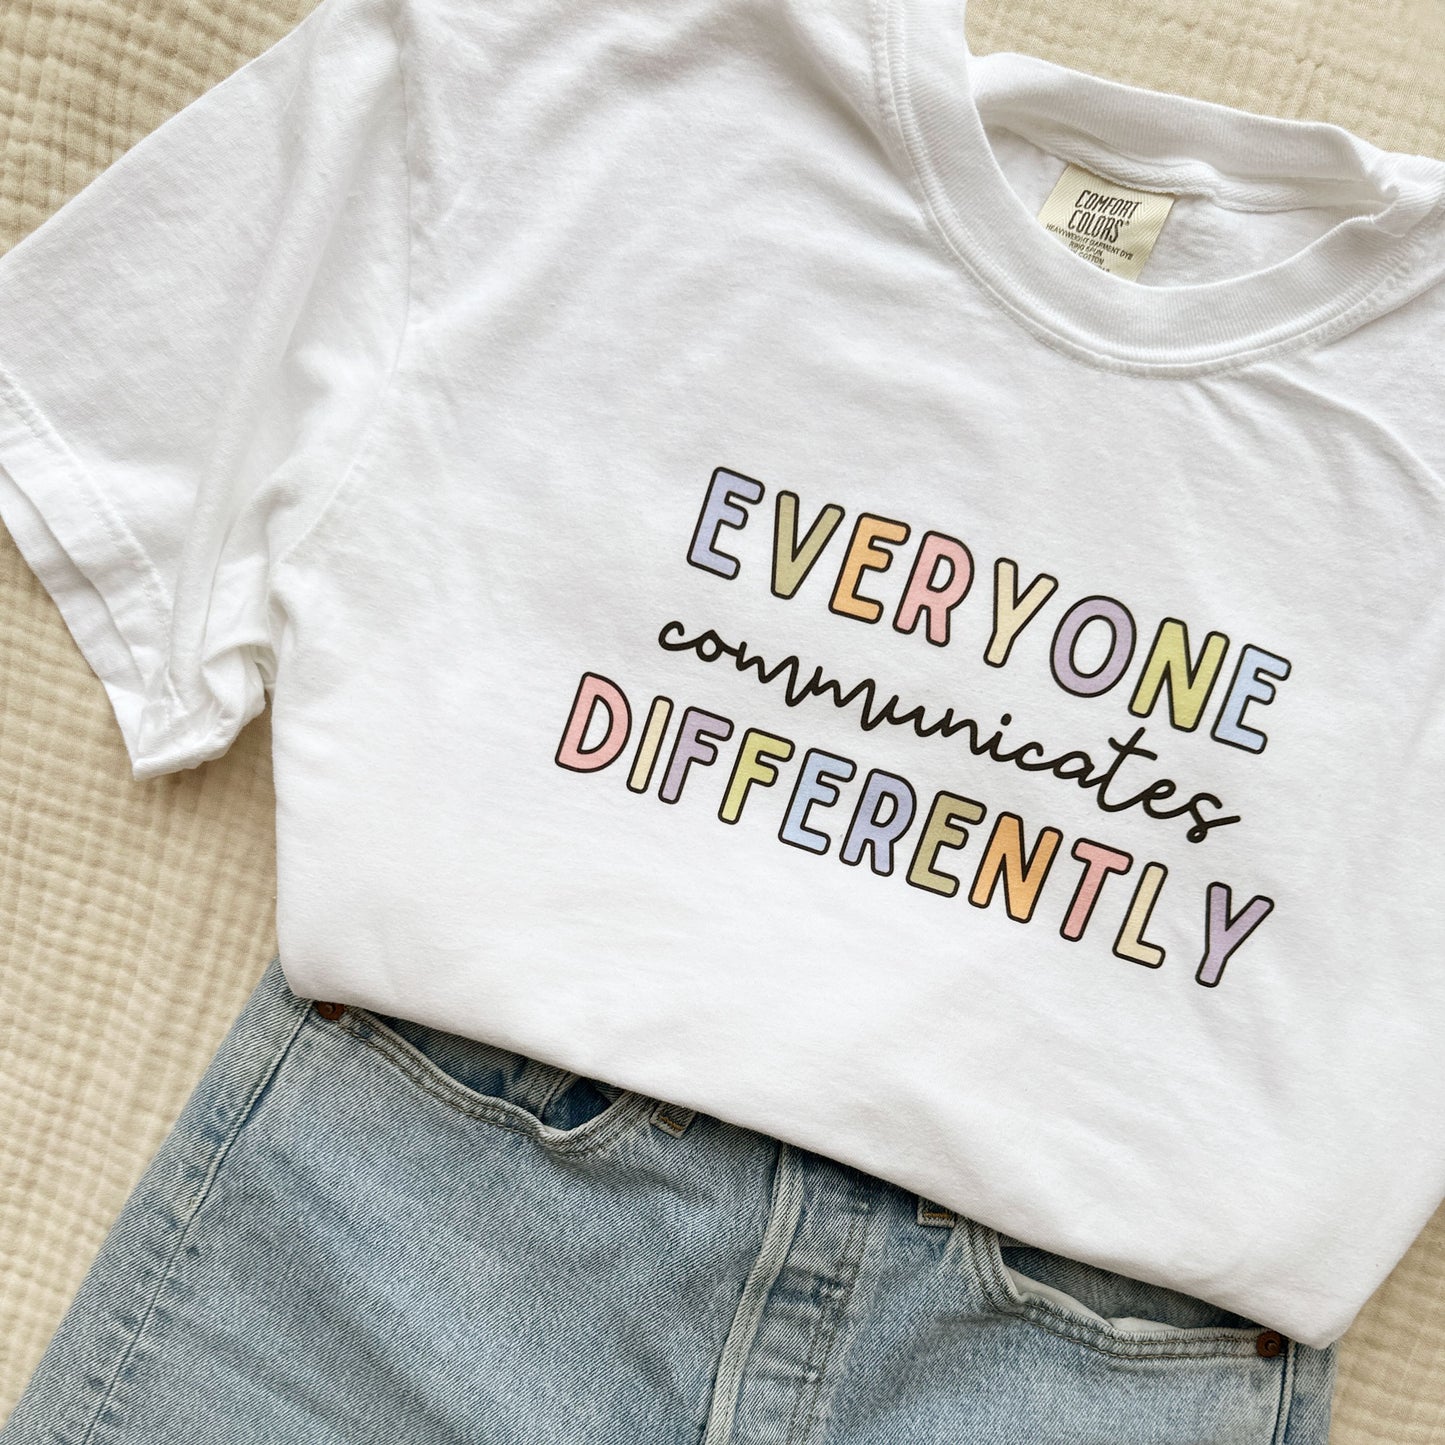 jeans and a white comfort colors crewneck short sleeve shirt with a colorful everyone communicates differently printed design